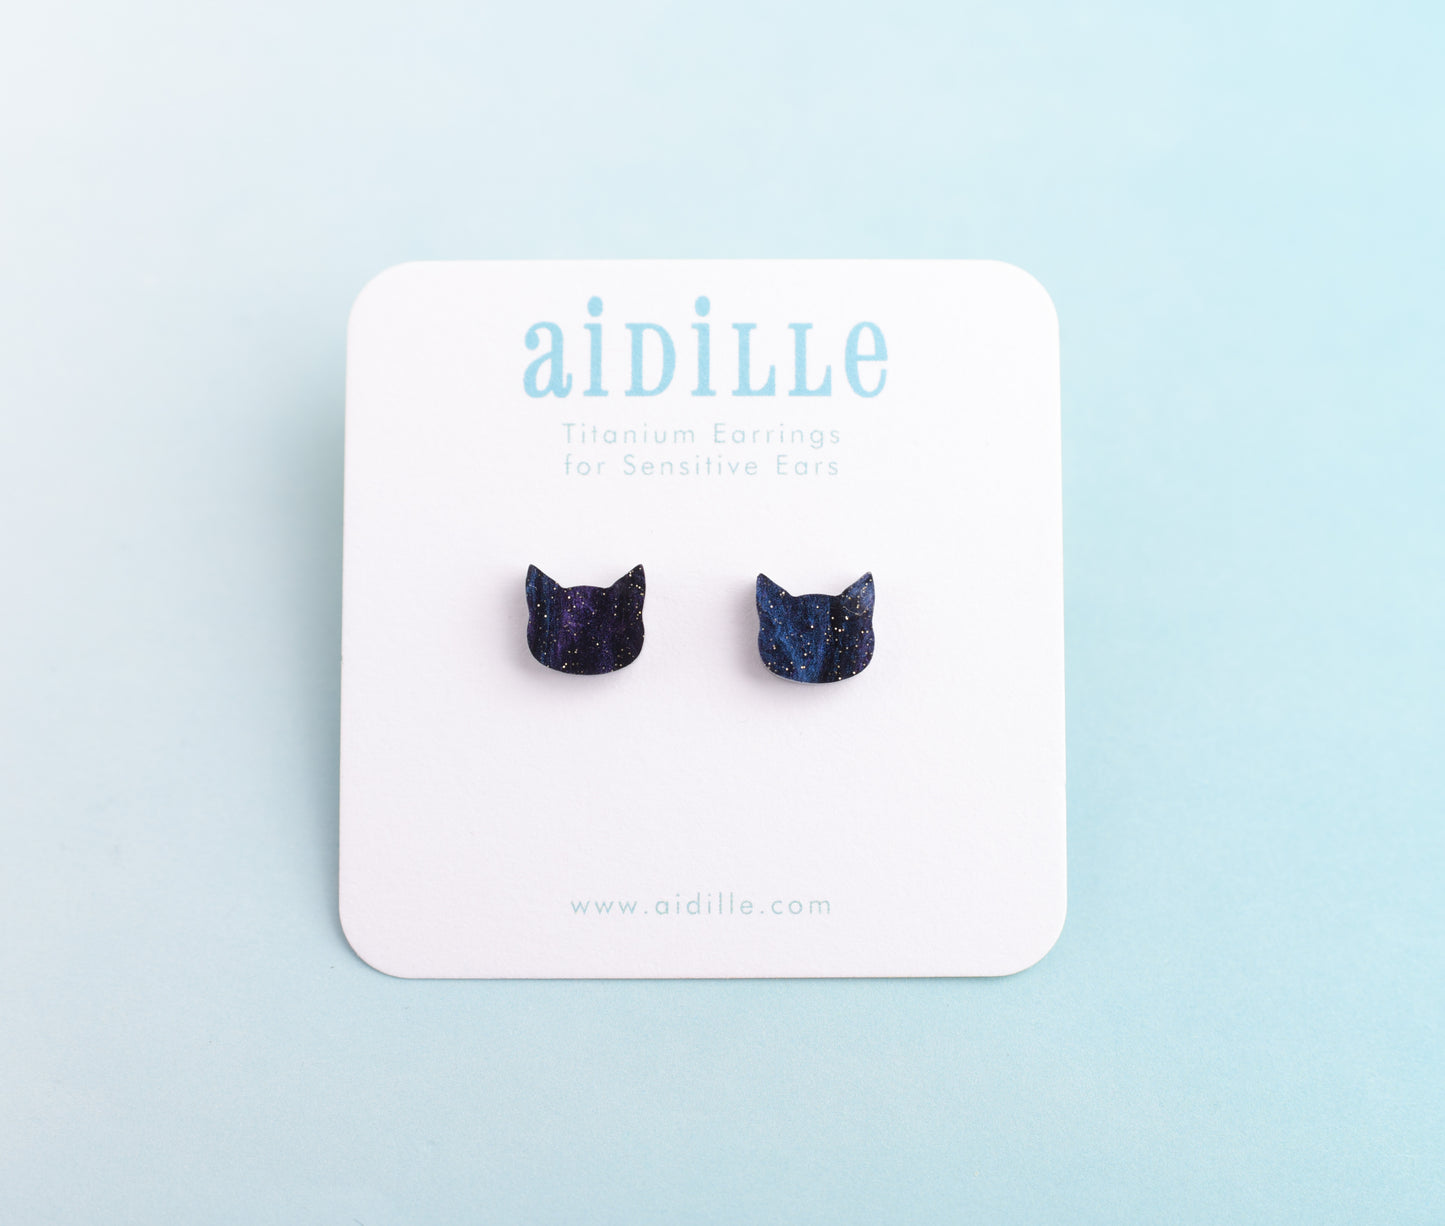 Black Galaxy Cat Earrings with Titanium Posts